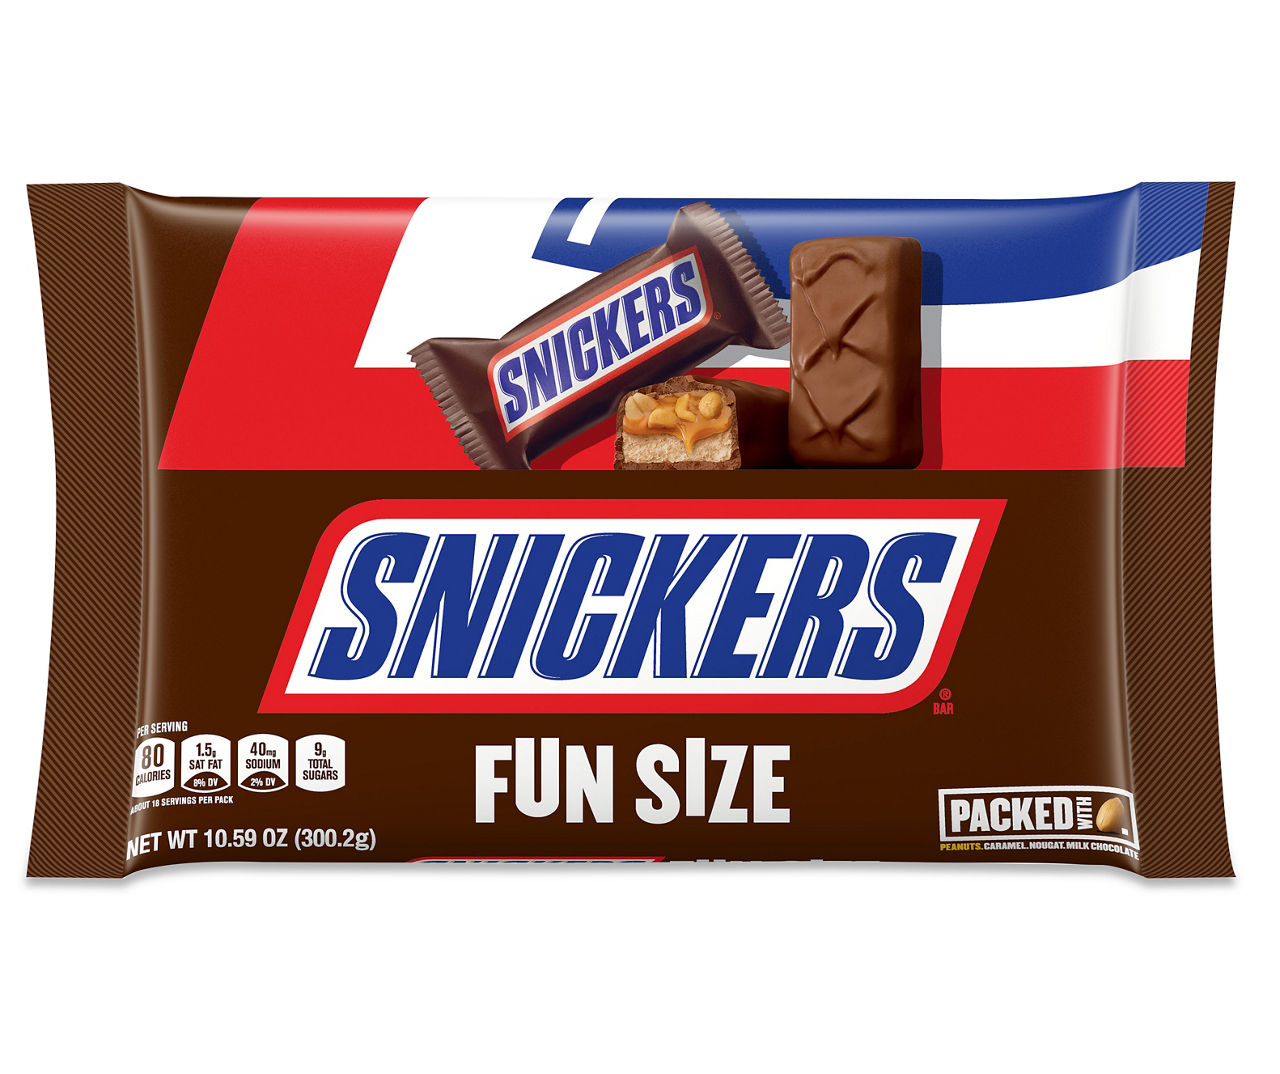 Snickers, Twix, Milky Way & More Assorted Chocolate Candy Bars - 18ct :  Target